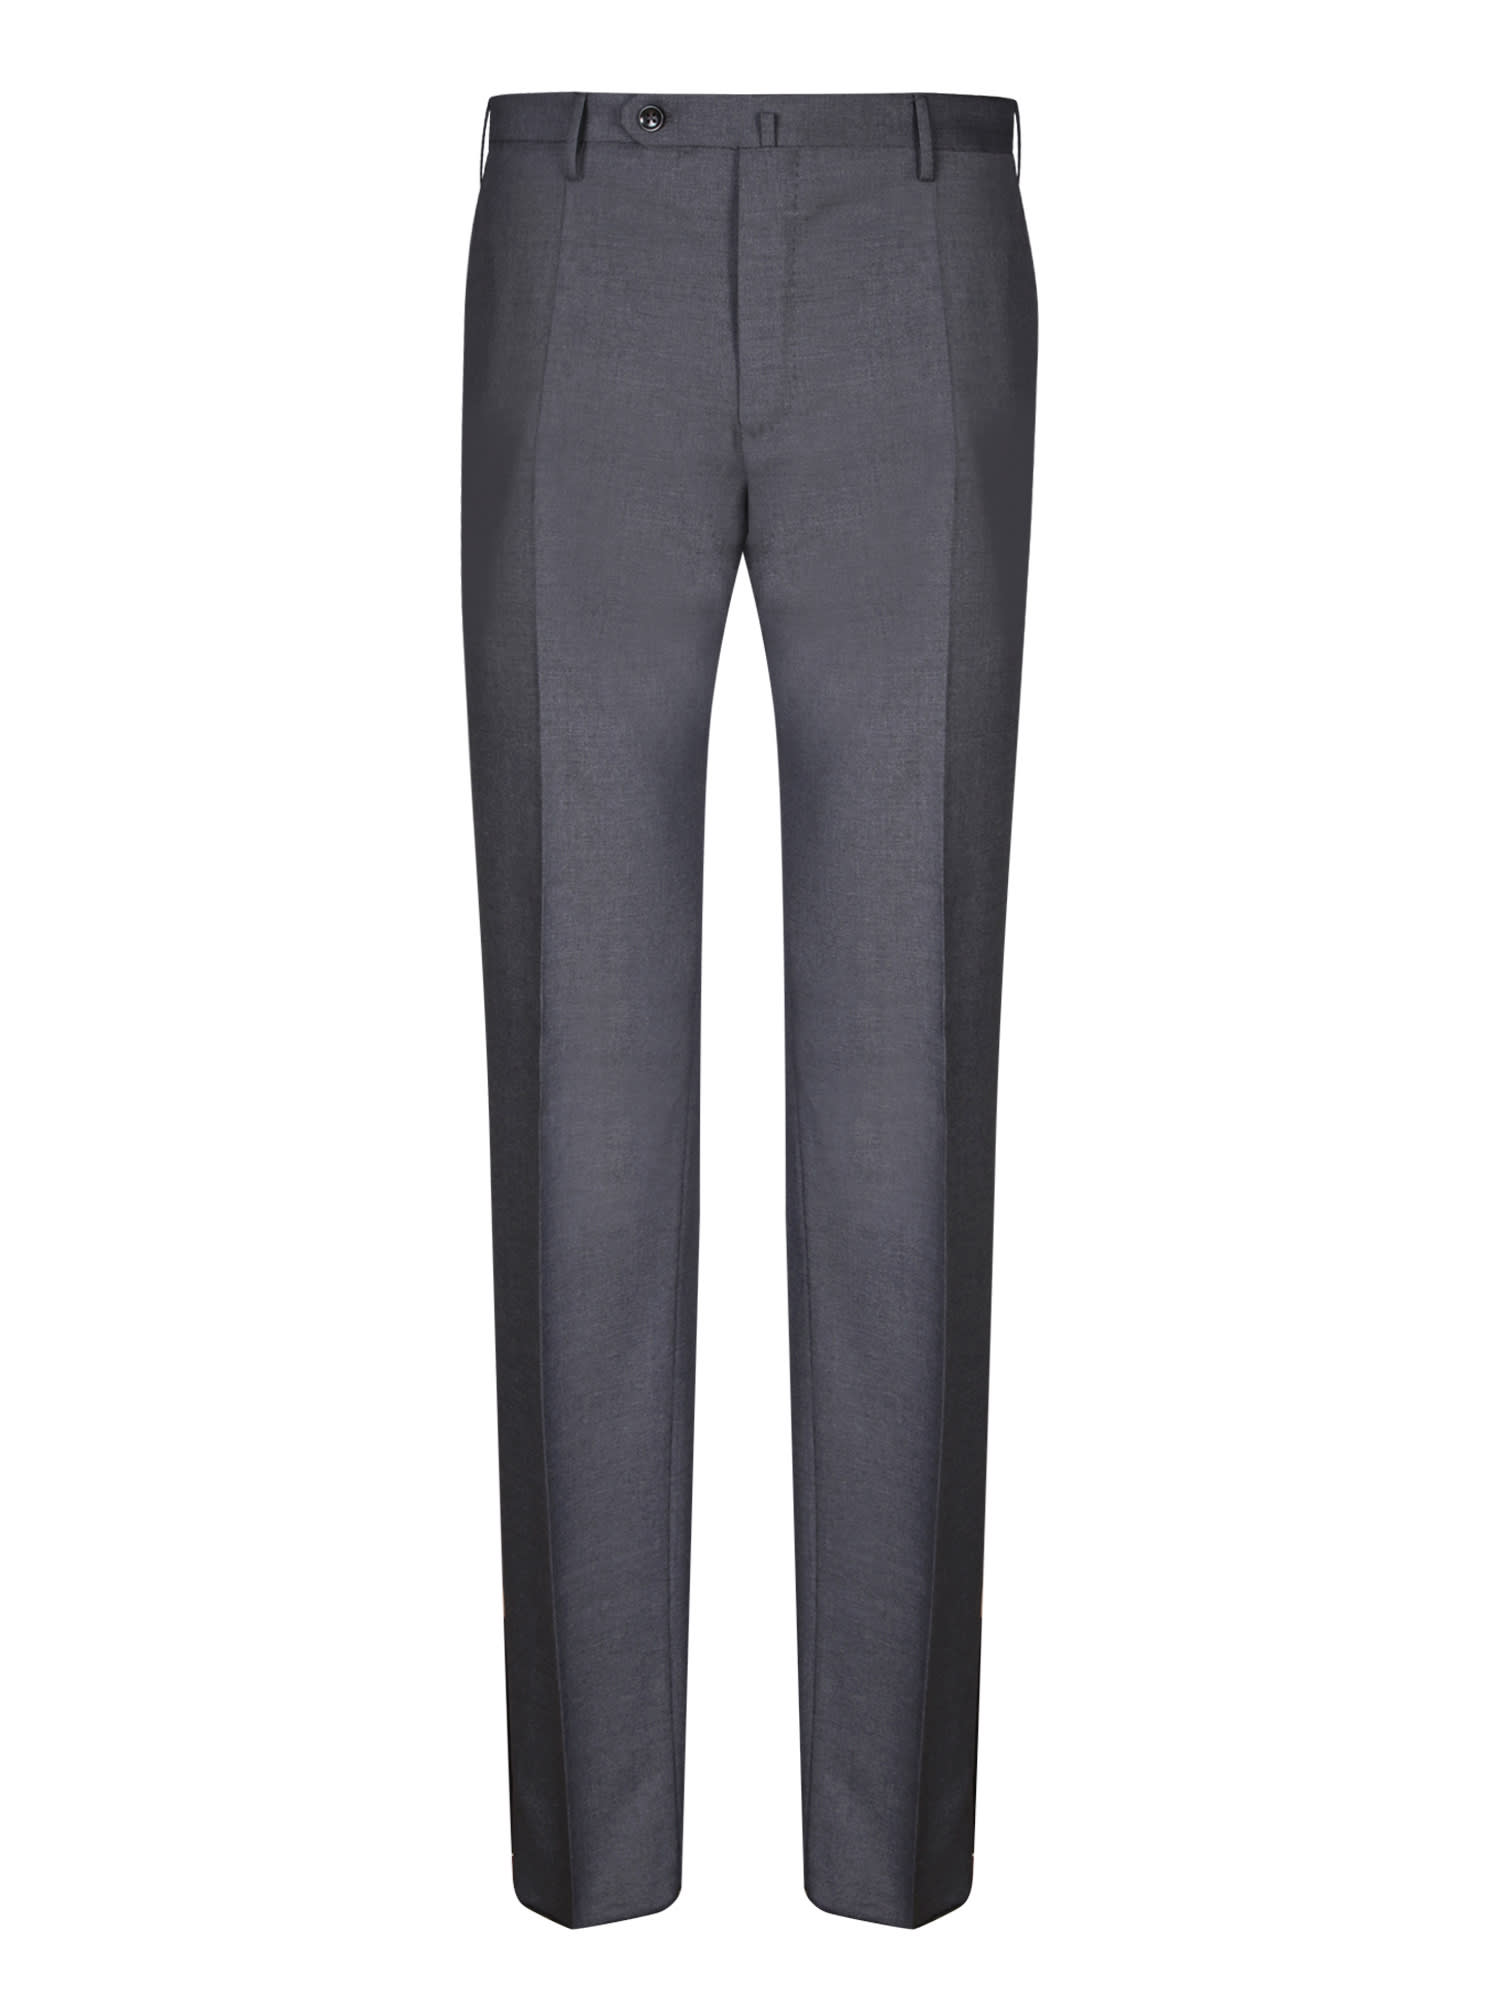 Slim Fit Gray Trousers